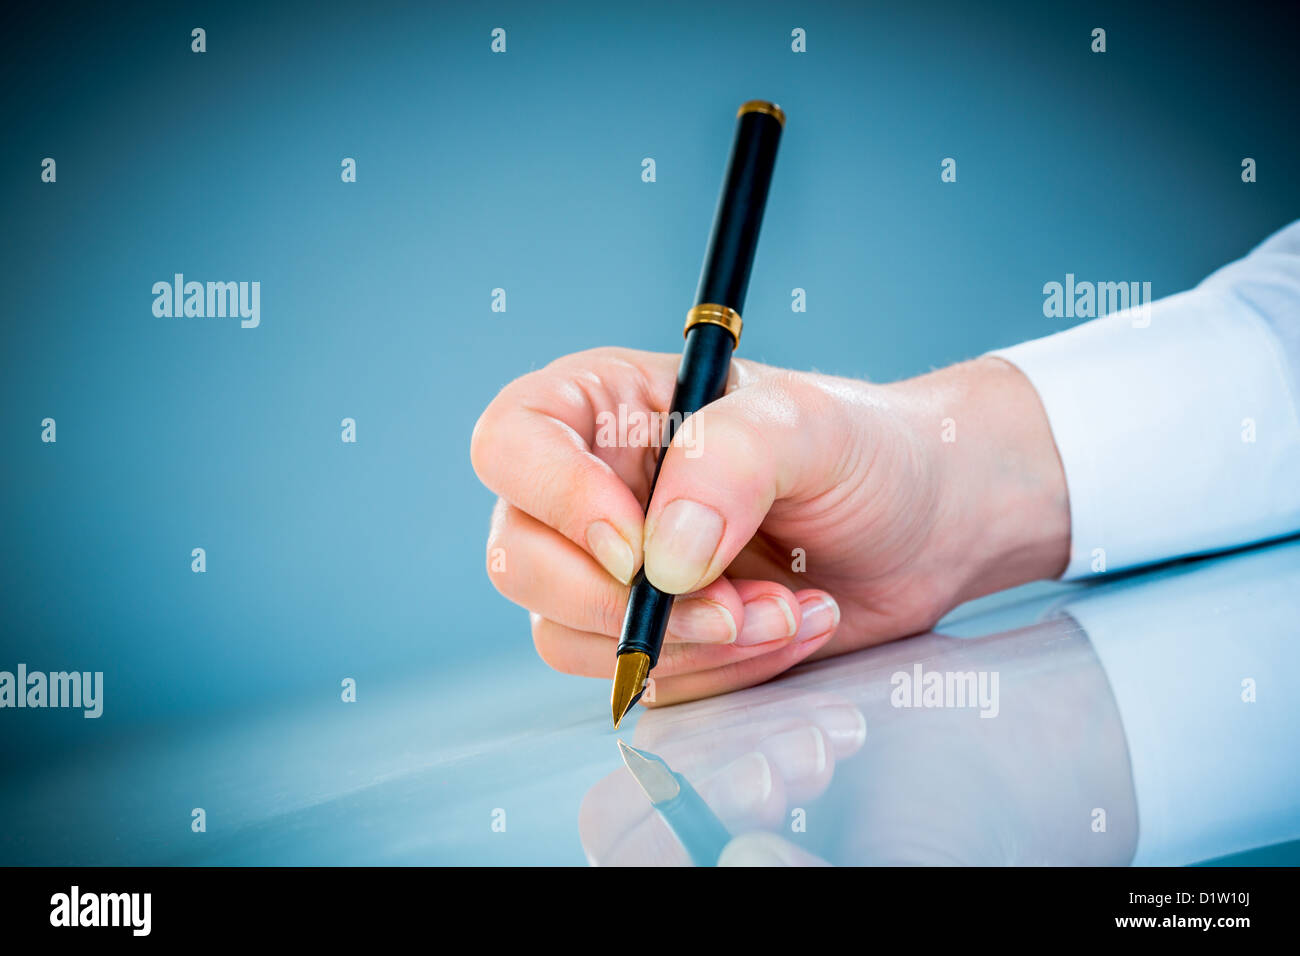 Woman's hand with a pen on a blue background Stock Photo